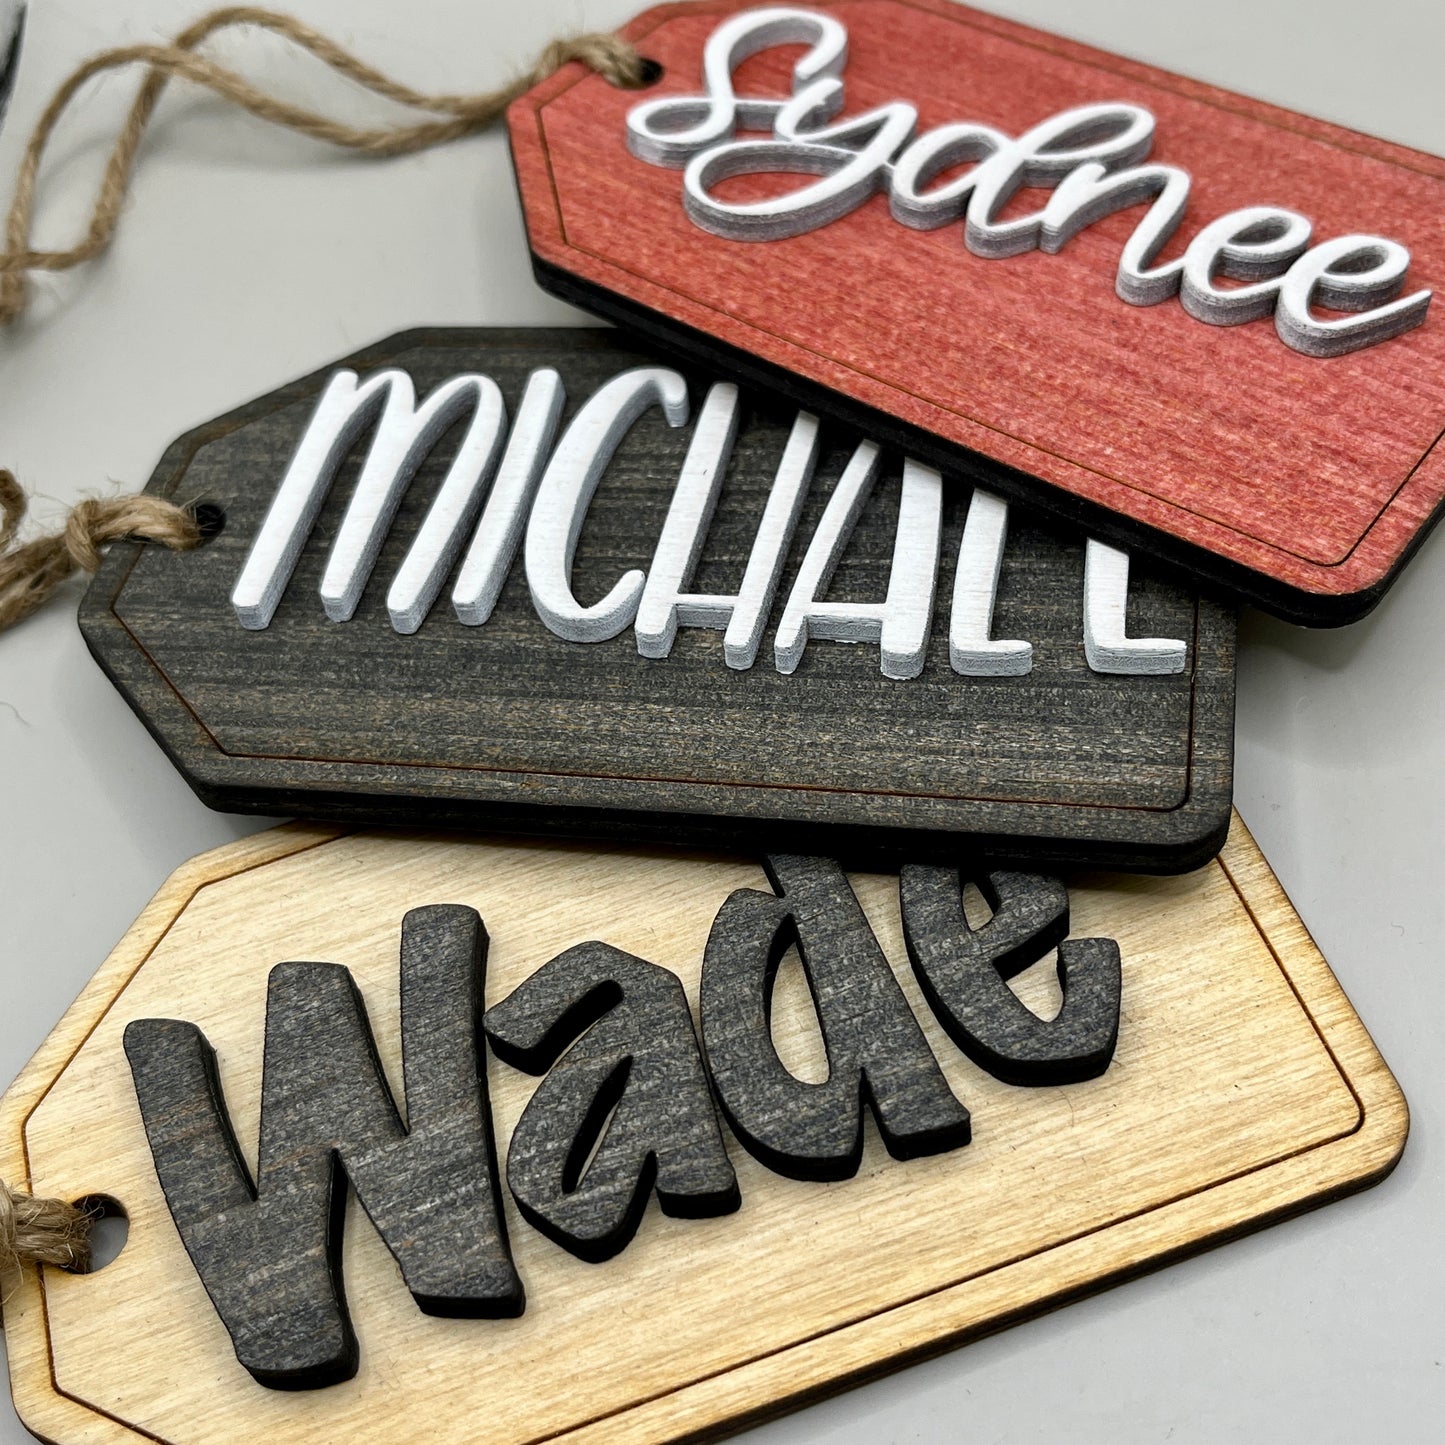 Personalized Wooden Gift Tags in Red Finish